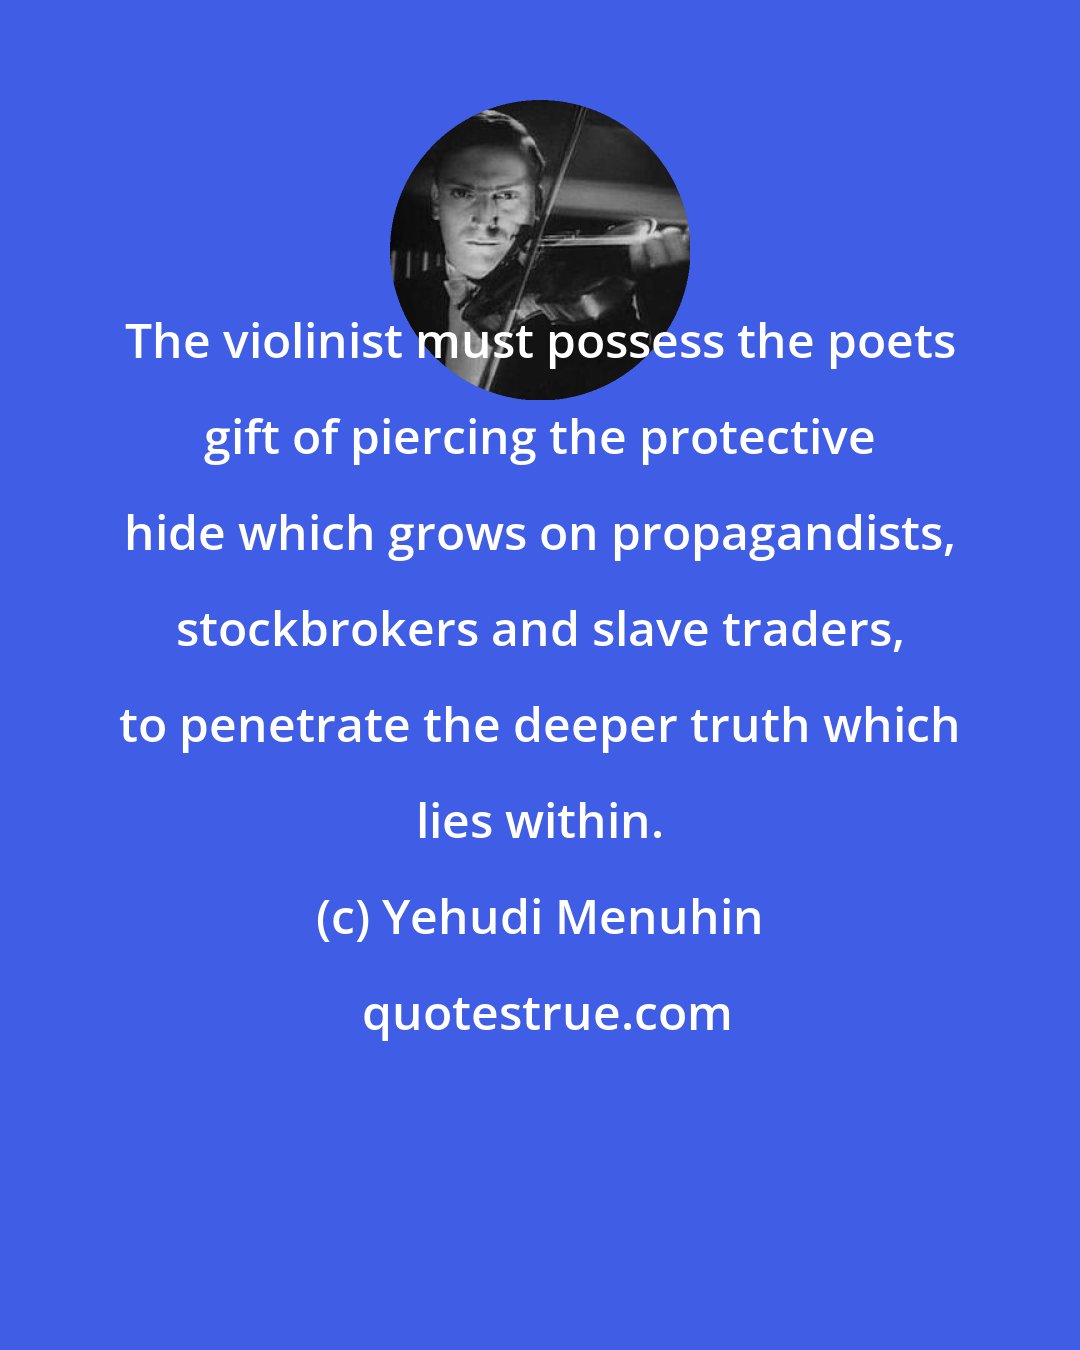 Yehudi Menuhin: The violinist must possess the poets gift of piercing the protective hide which grows on propagandists, stockbrokers and slave traders, to penetrate the deeper truth which lies within.